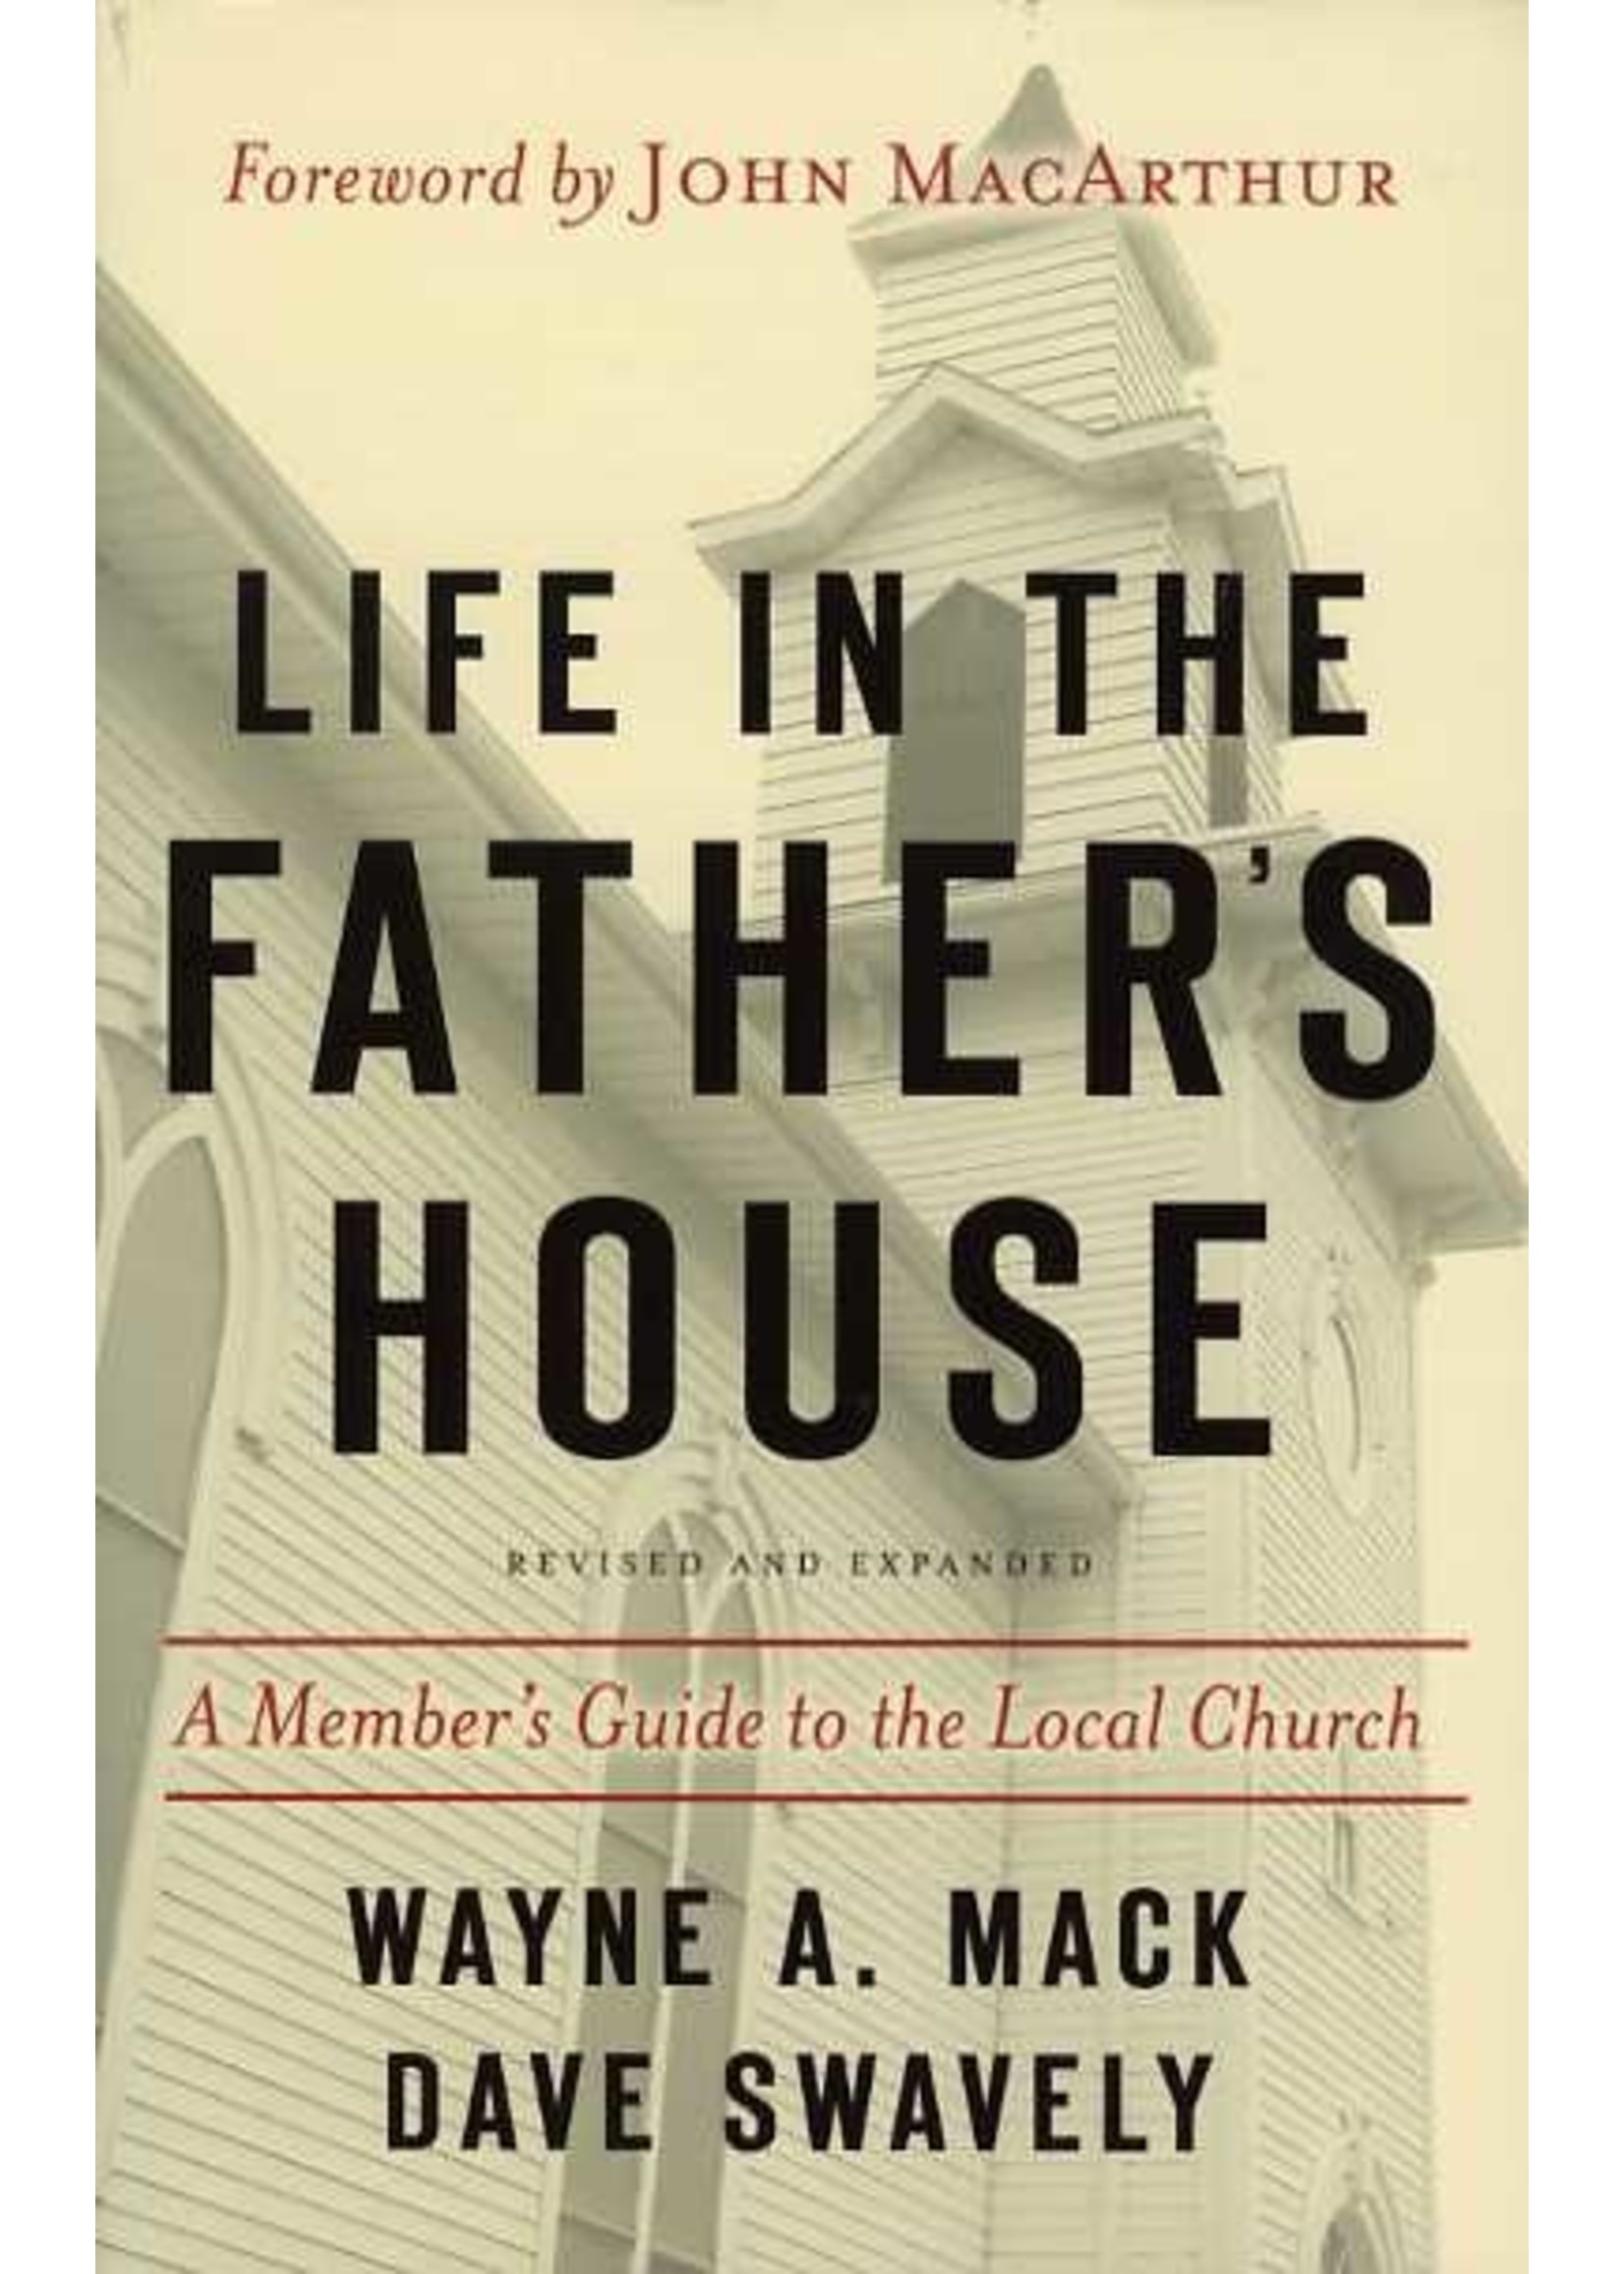 Life in the Father's House - Wayne Mack